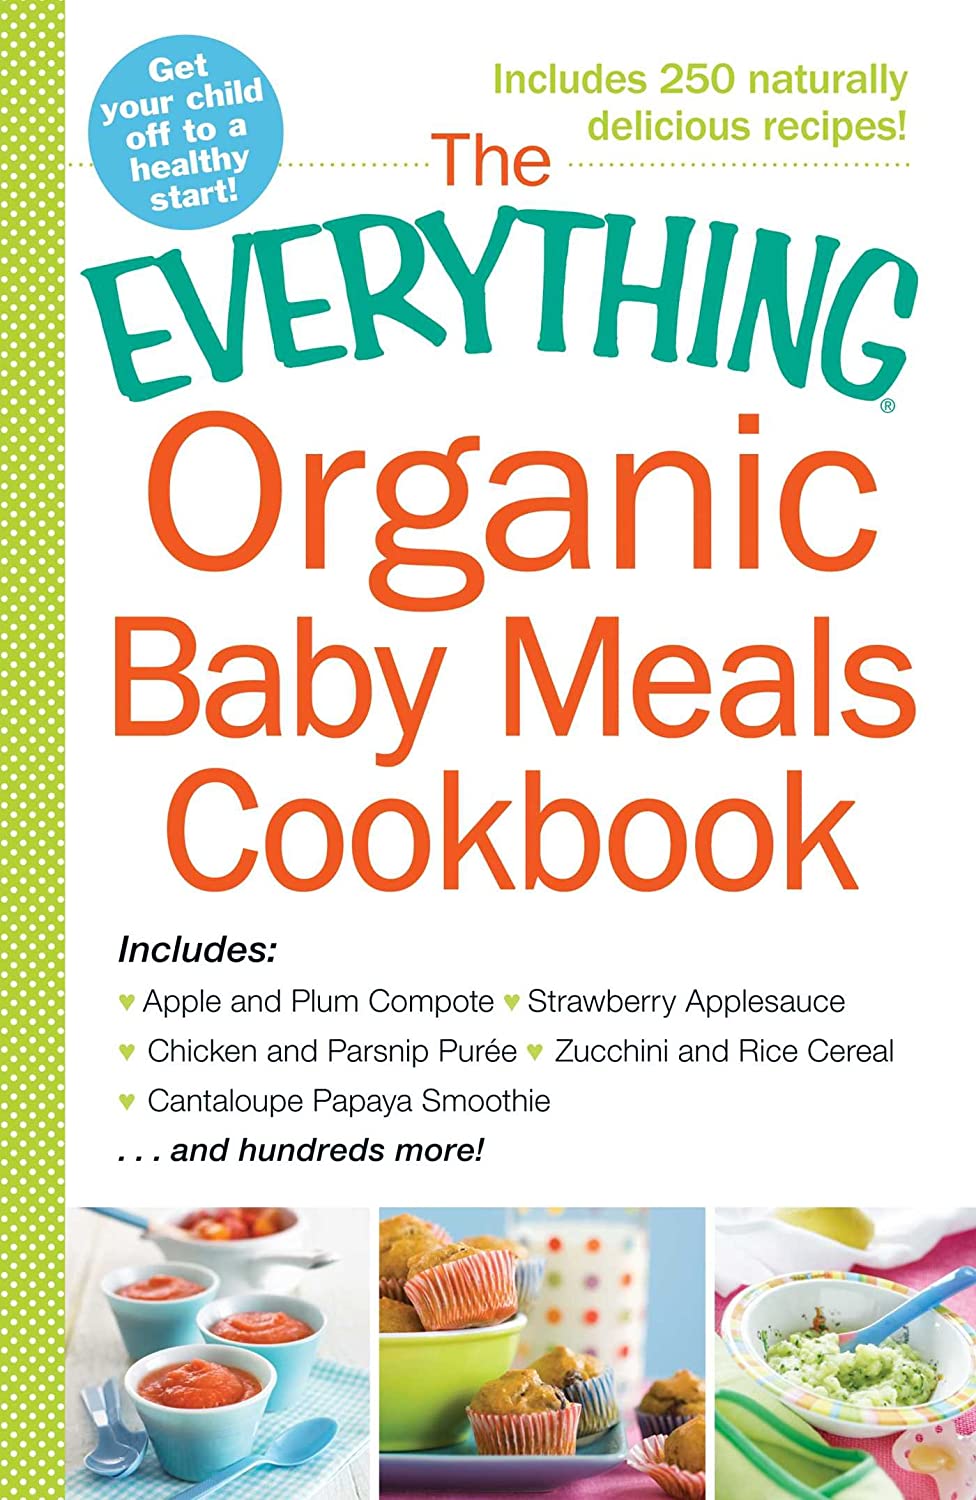 The Everything Organic Baby Meals Cookbook: Includes Apple and Plum Compote, Strawberry Applesauce, Chicken and Parsnip Puree, Zucchini and Rice Cereal, Cantaloupe Papaya Smoothie…and Hundreds More!